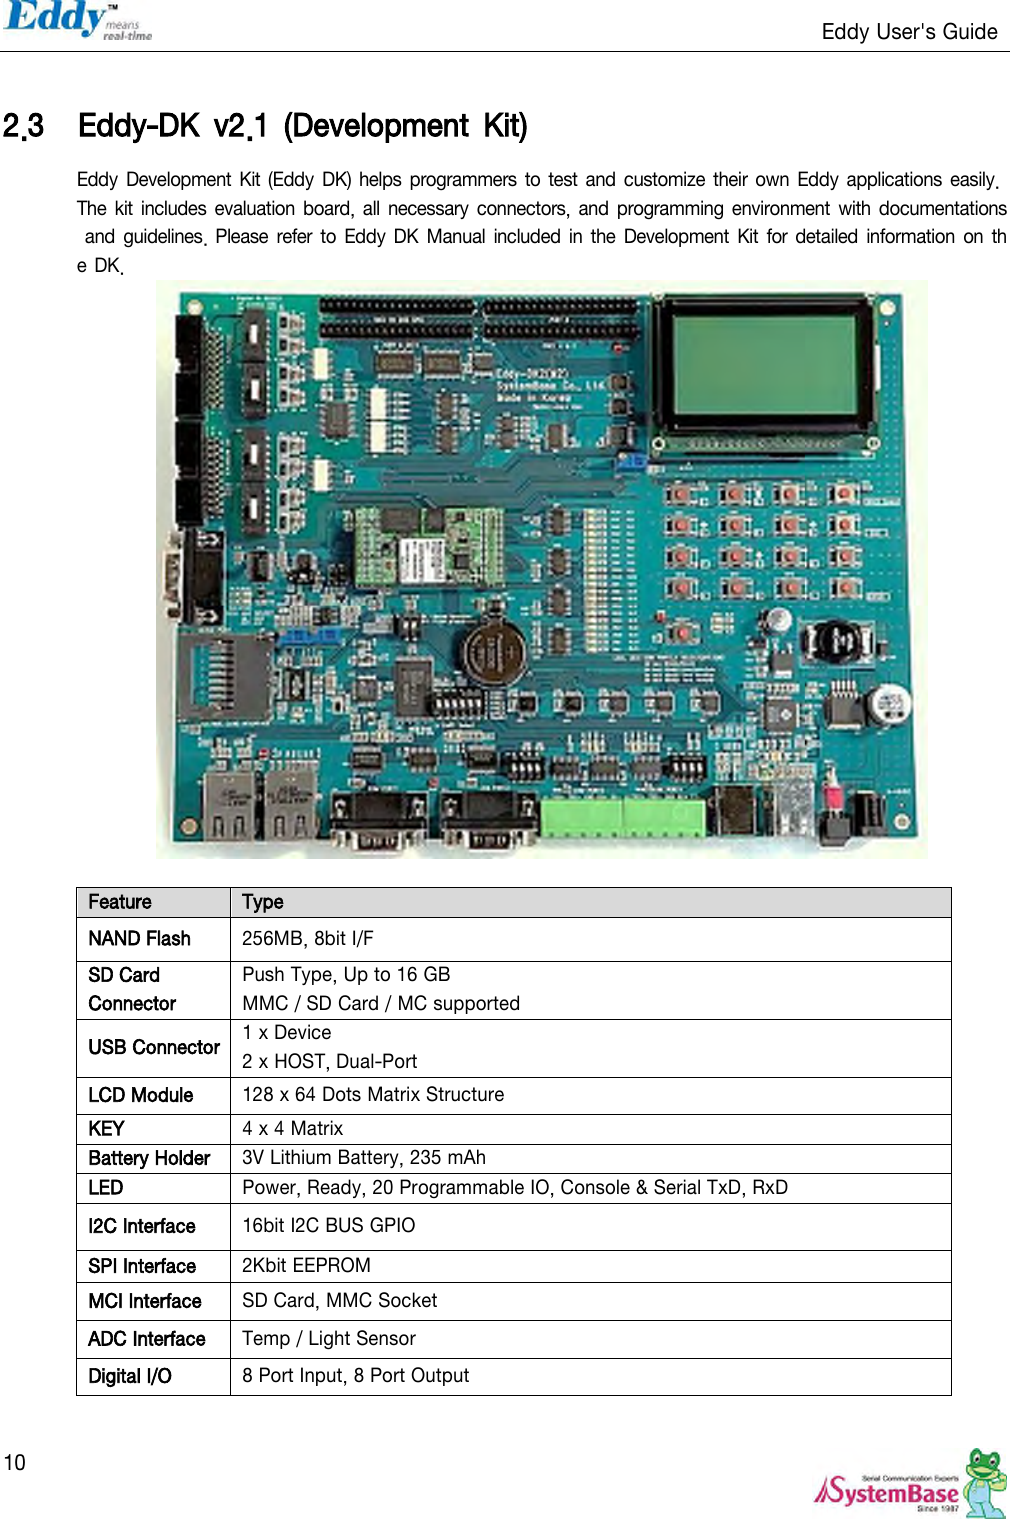                                                                   Eddy User&apos;s Guide   10  2.3 Eddy-DK  v2.1  (Development  Kit) Eddy Development Kit (Eddy  DK)  helps  programmers  to test and customize their own Eddy applications easily. The kit includes evaluation board,  all  necessary connectors, and programming  environment with documentations and guidelines. Please refer to  Eddy DK  Manual included in the Development Kit  for detailed information on  the DK.   Feature Type NAND Flash 256MB, 8bit I/F SD Card   Connector Push Type, Up to 16 GB MMC / SD Card / MC supported USB Connector 1 x Device 2 x HOST, Dual-Port   LCD Module 128 x 64 Dots Matrix Structure KEY 4 x 4 Matrix Battery Holder 3V Lithium Battery, 235 mAh LED Power, Ready, 20 Programmable IO, Console &amp; Serial TxD, RxD I2C Interface 16bit I2C BUS GPIO SPI Interface 2Kbit EEPROM MCI Interface SD Card, MMC Socket ADC Interface Temp / Light Sensor Digital I/O 8 Port Input, 8 Port Output 